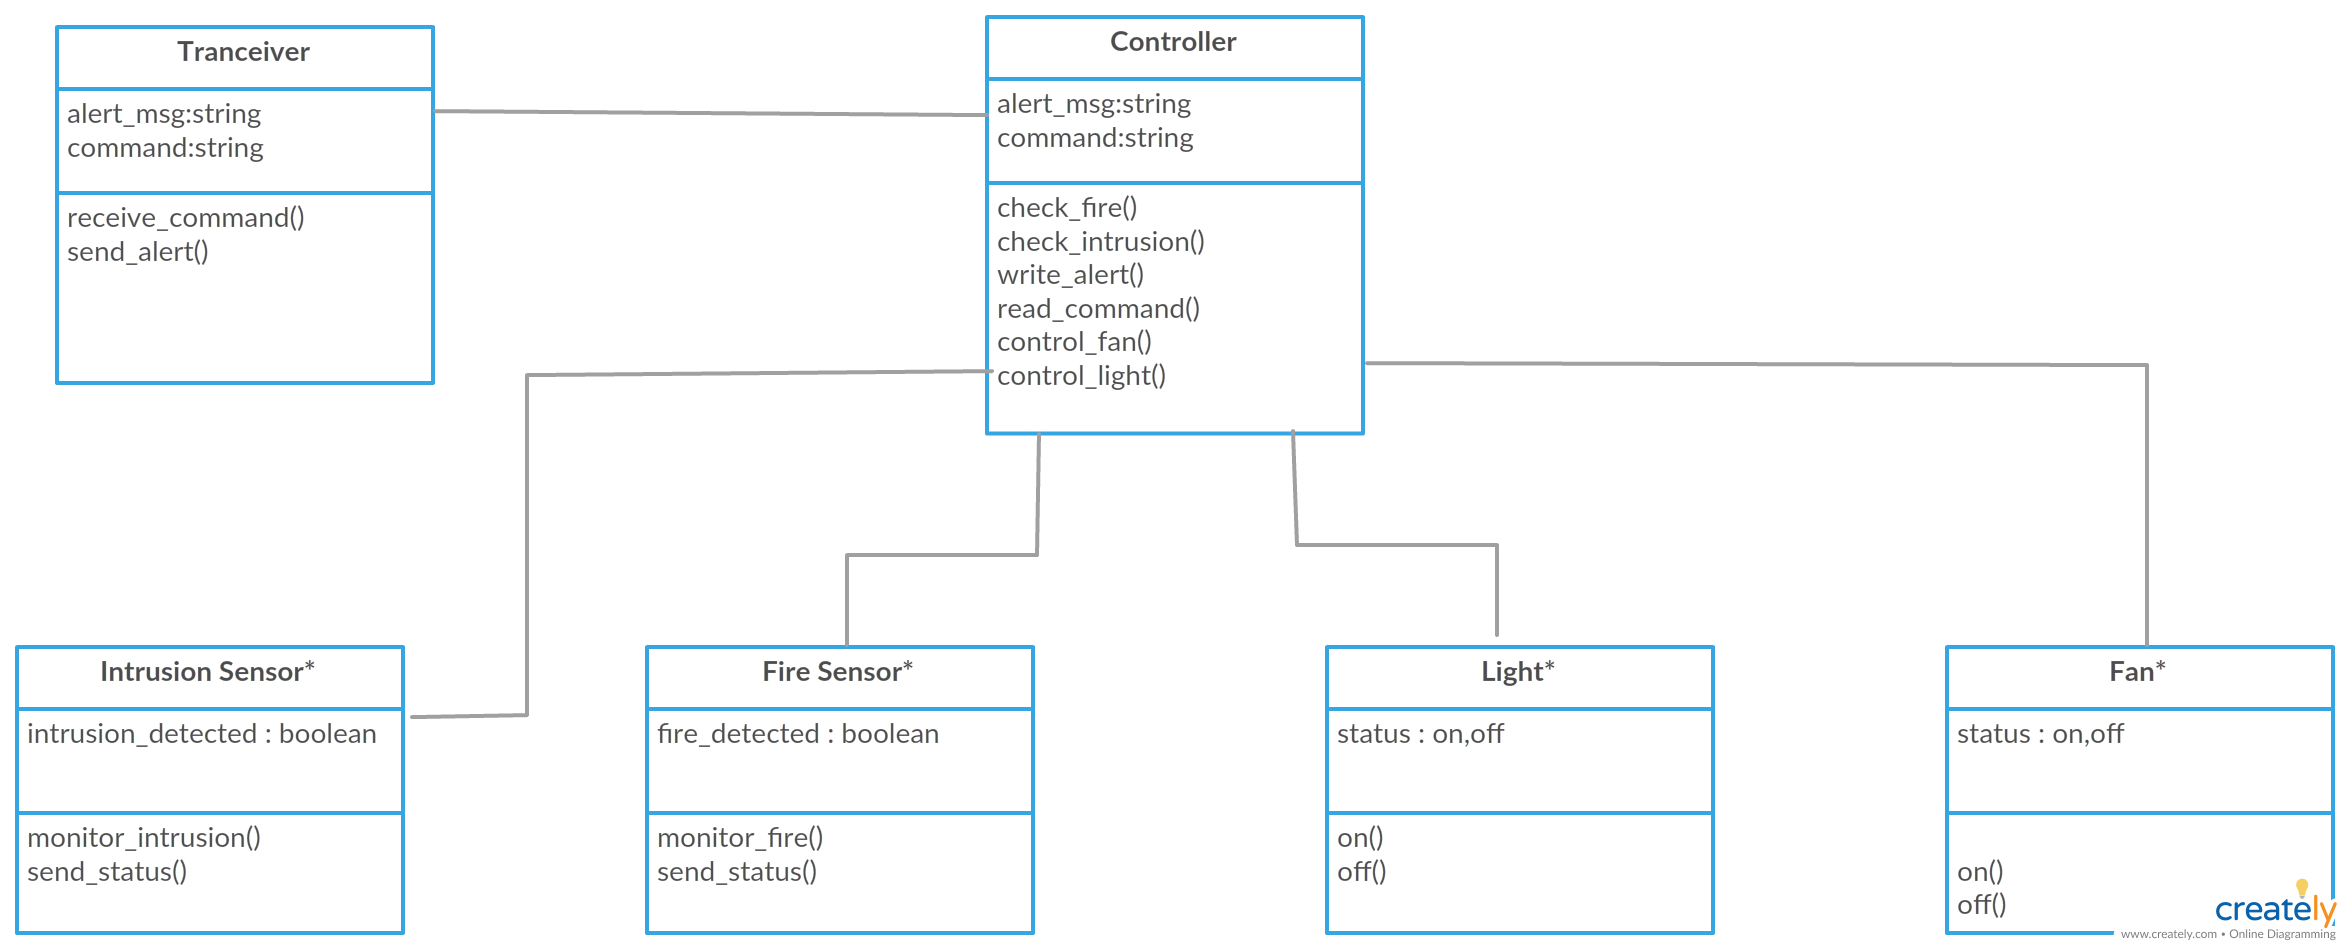 Uml Class Diagrams For Home Automation System You Can Edit